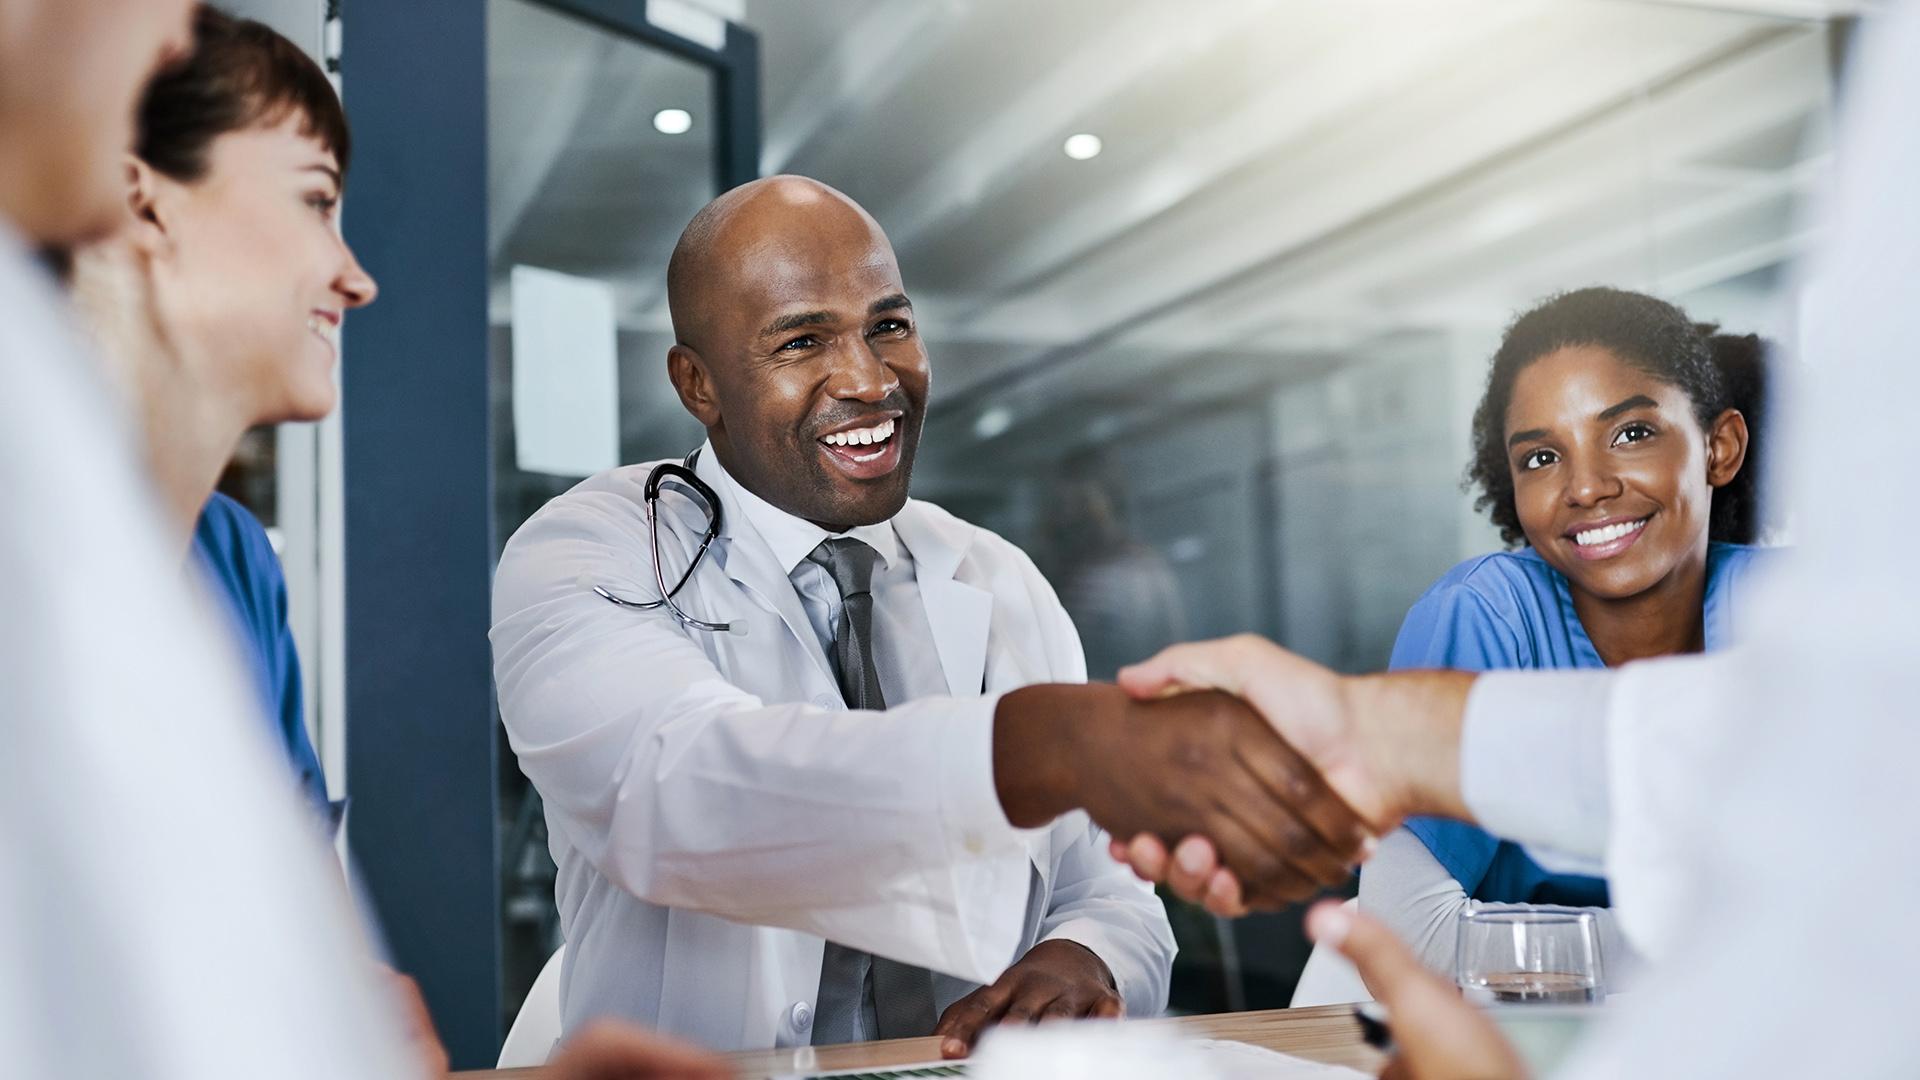 A smiling doctor shakes hands with another healthcare professional, surrounded by smiling colleagues.